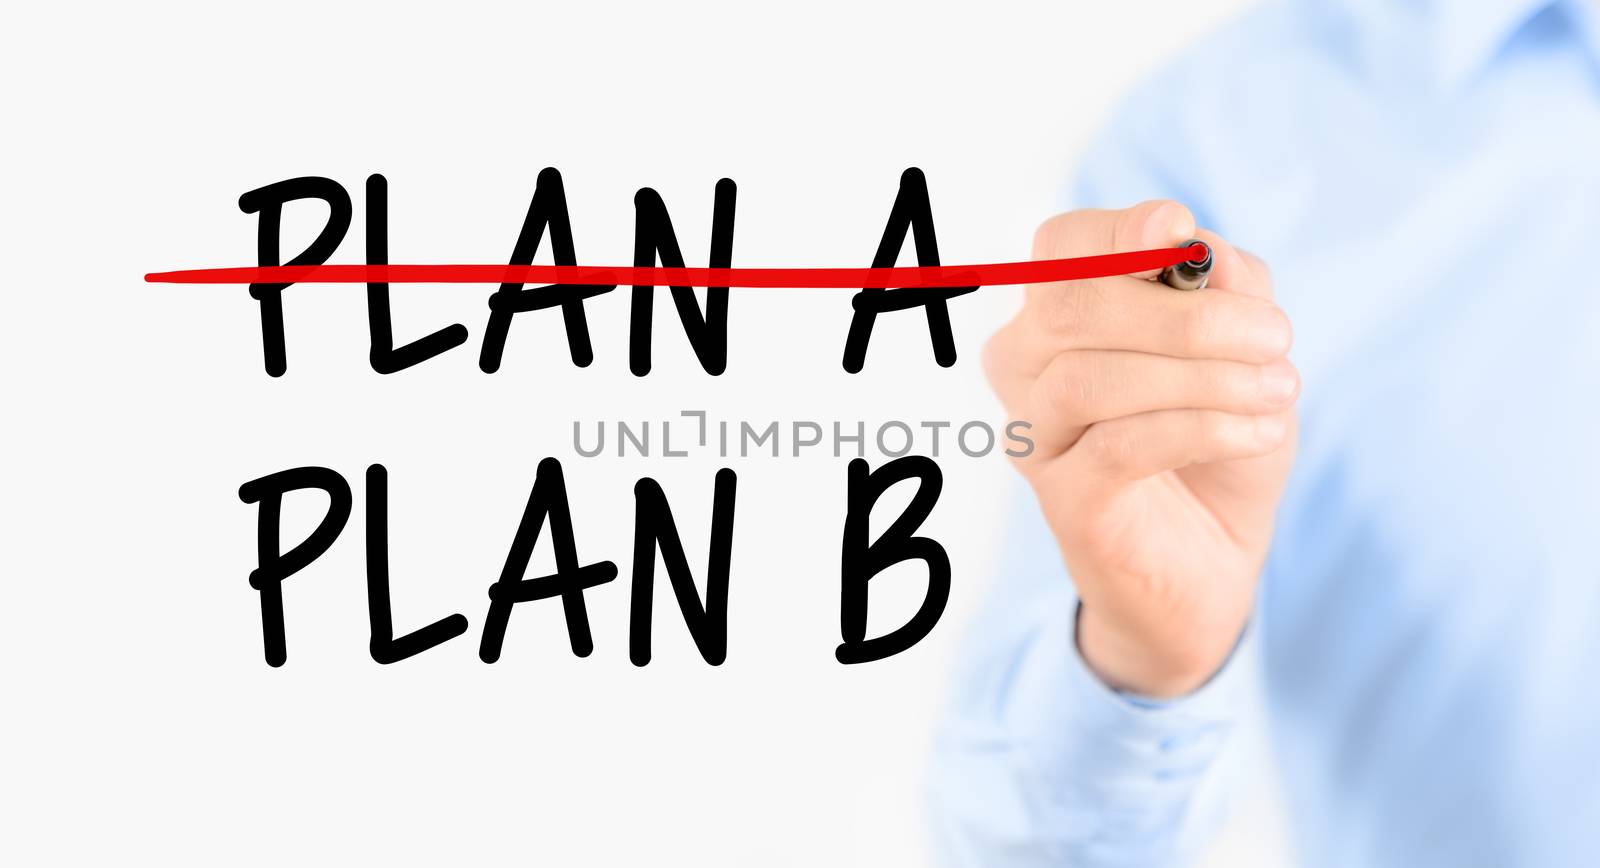 Business plan strategy changing. Businessman crossing over plan A, writing plan B. Isolated on white background.